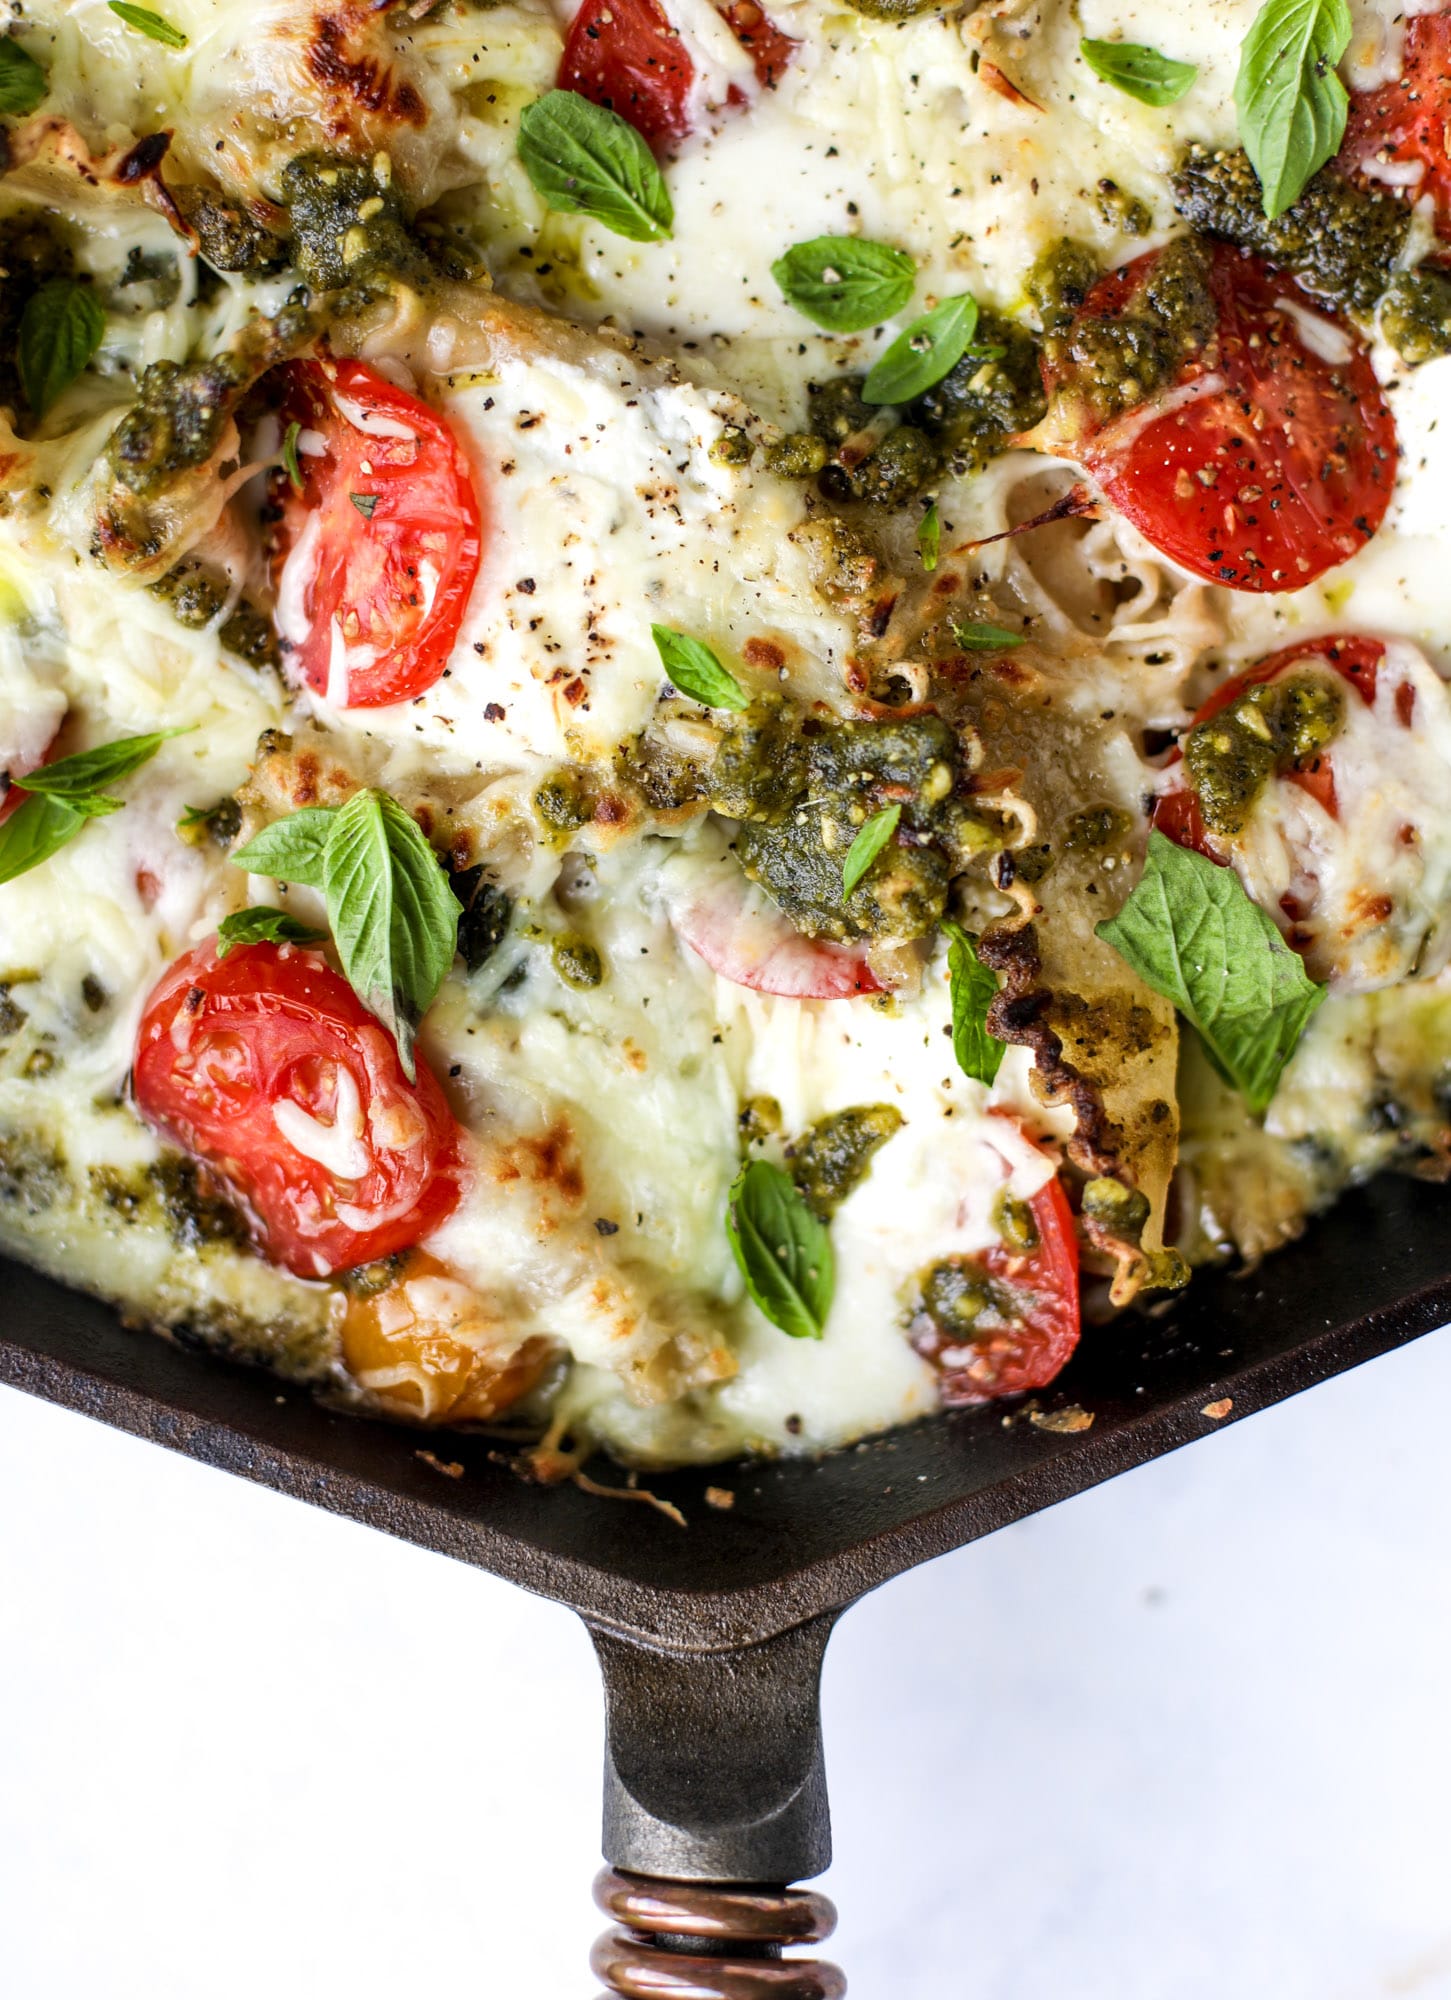 Quick caprese skillet lasagna is a lovely and comforting summer meal! Lots of fresh basil, ripe tomatoes and cheese bring this easy weeknight meal together.